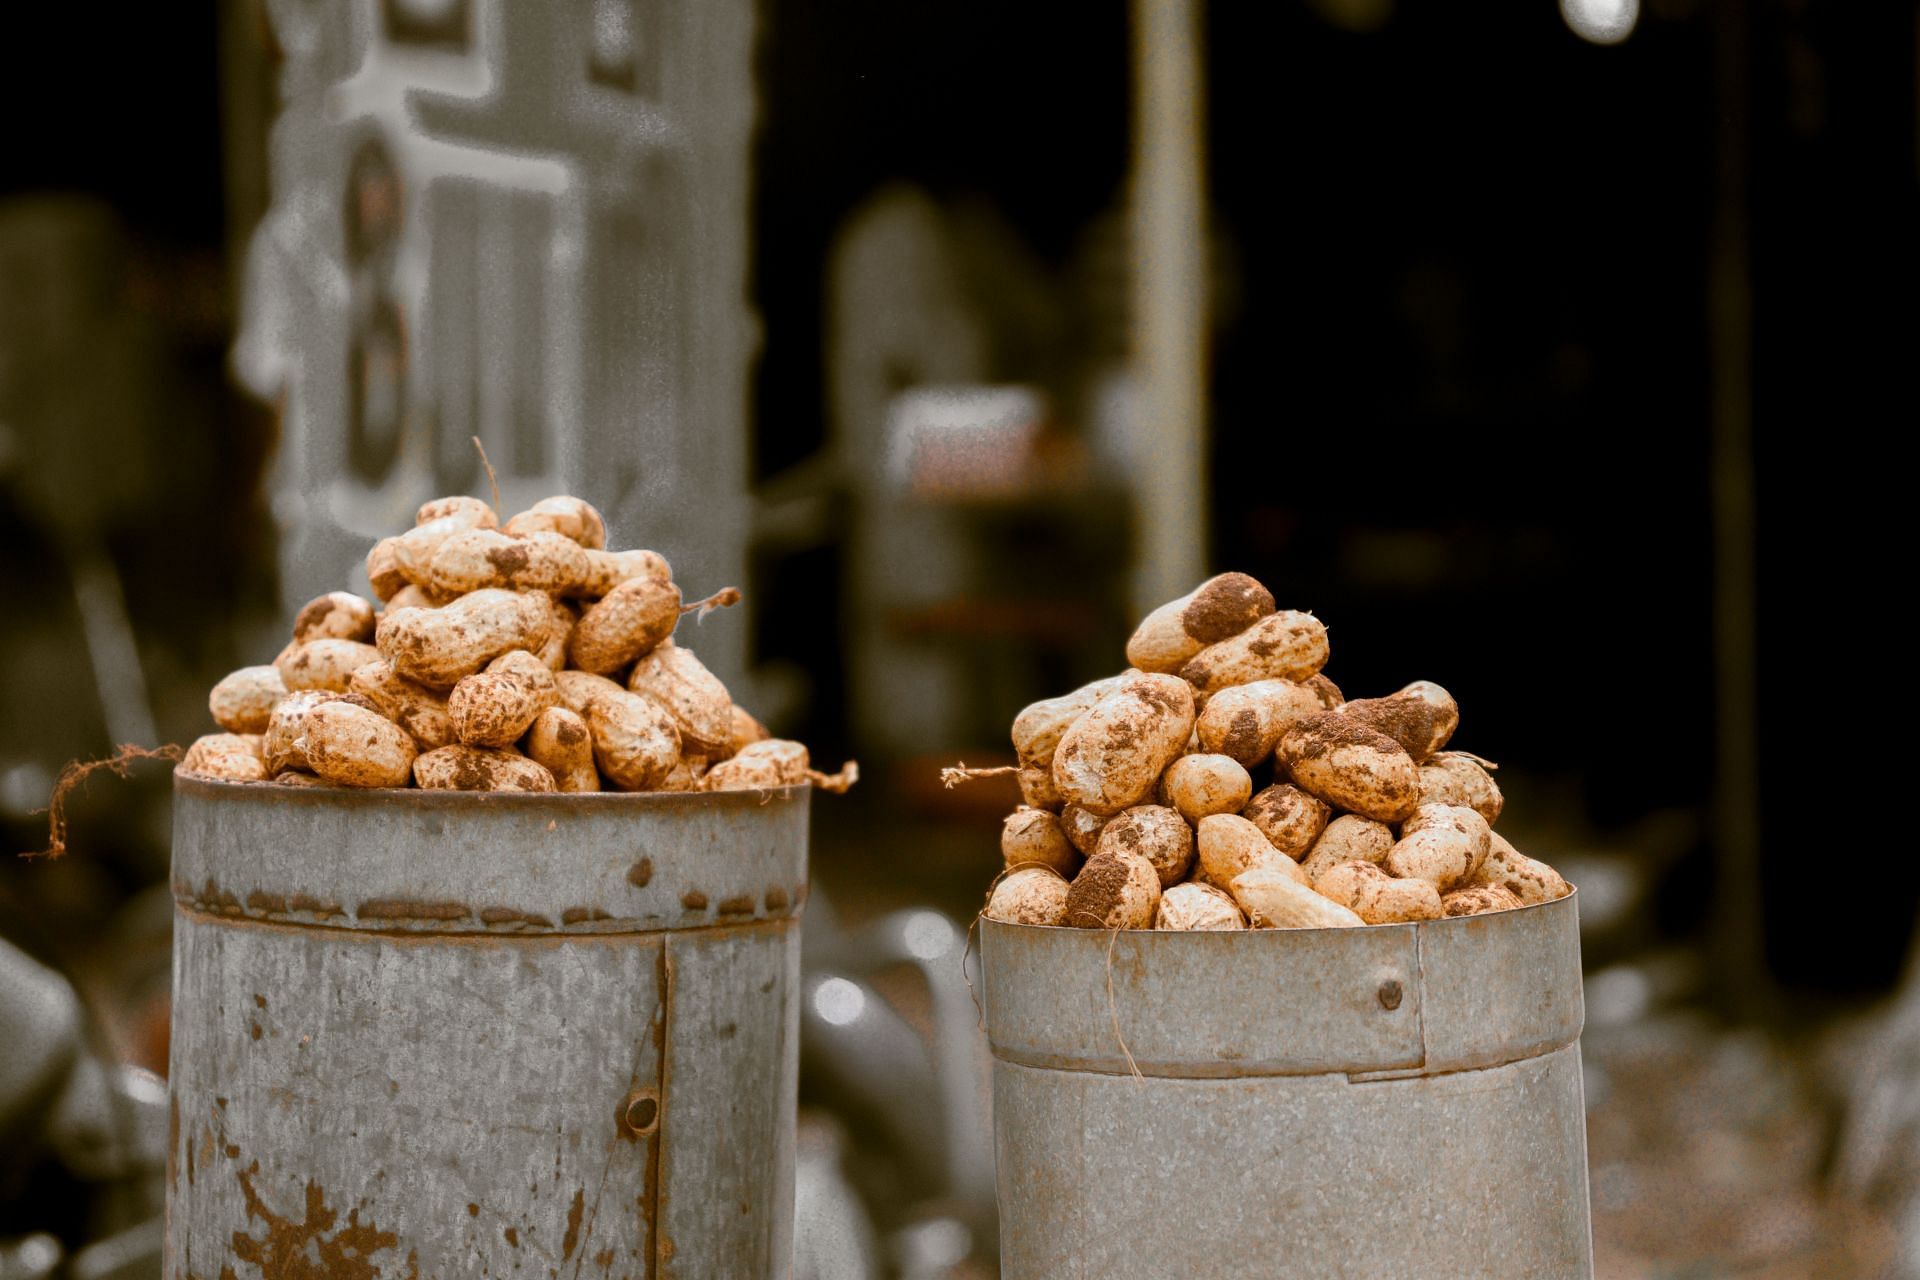 Groundnuts for weight loss. (Image via Unsplash/ Gowtham)